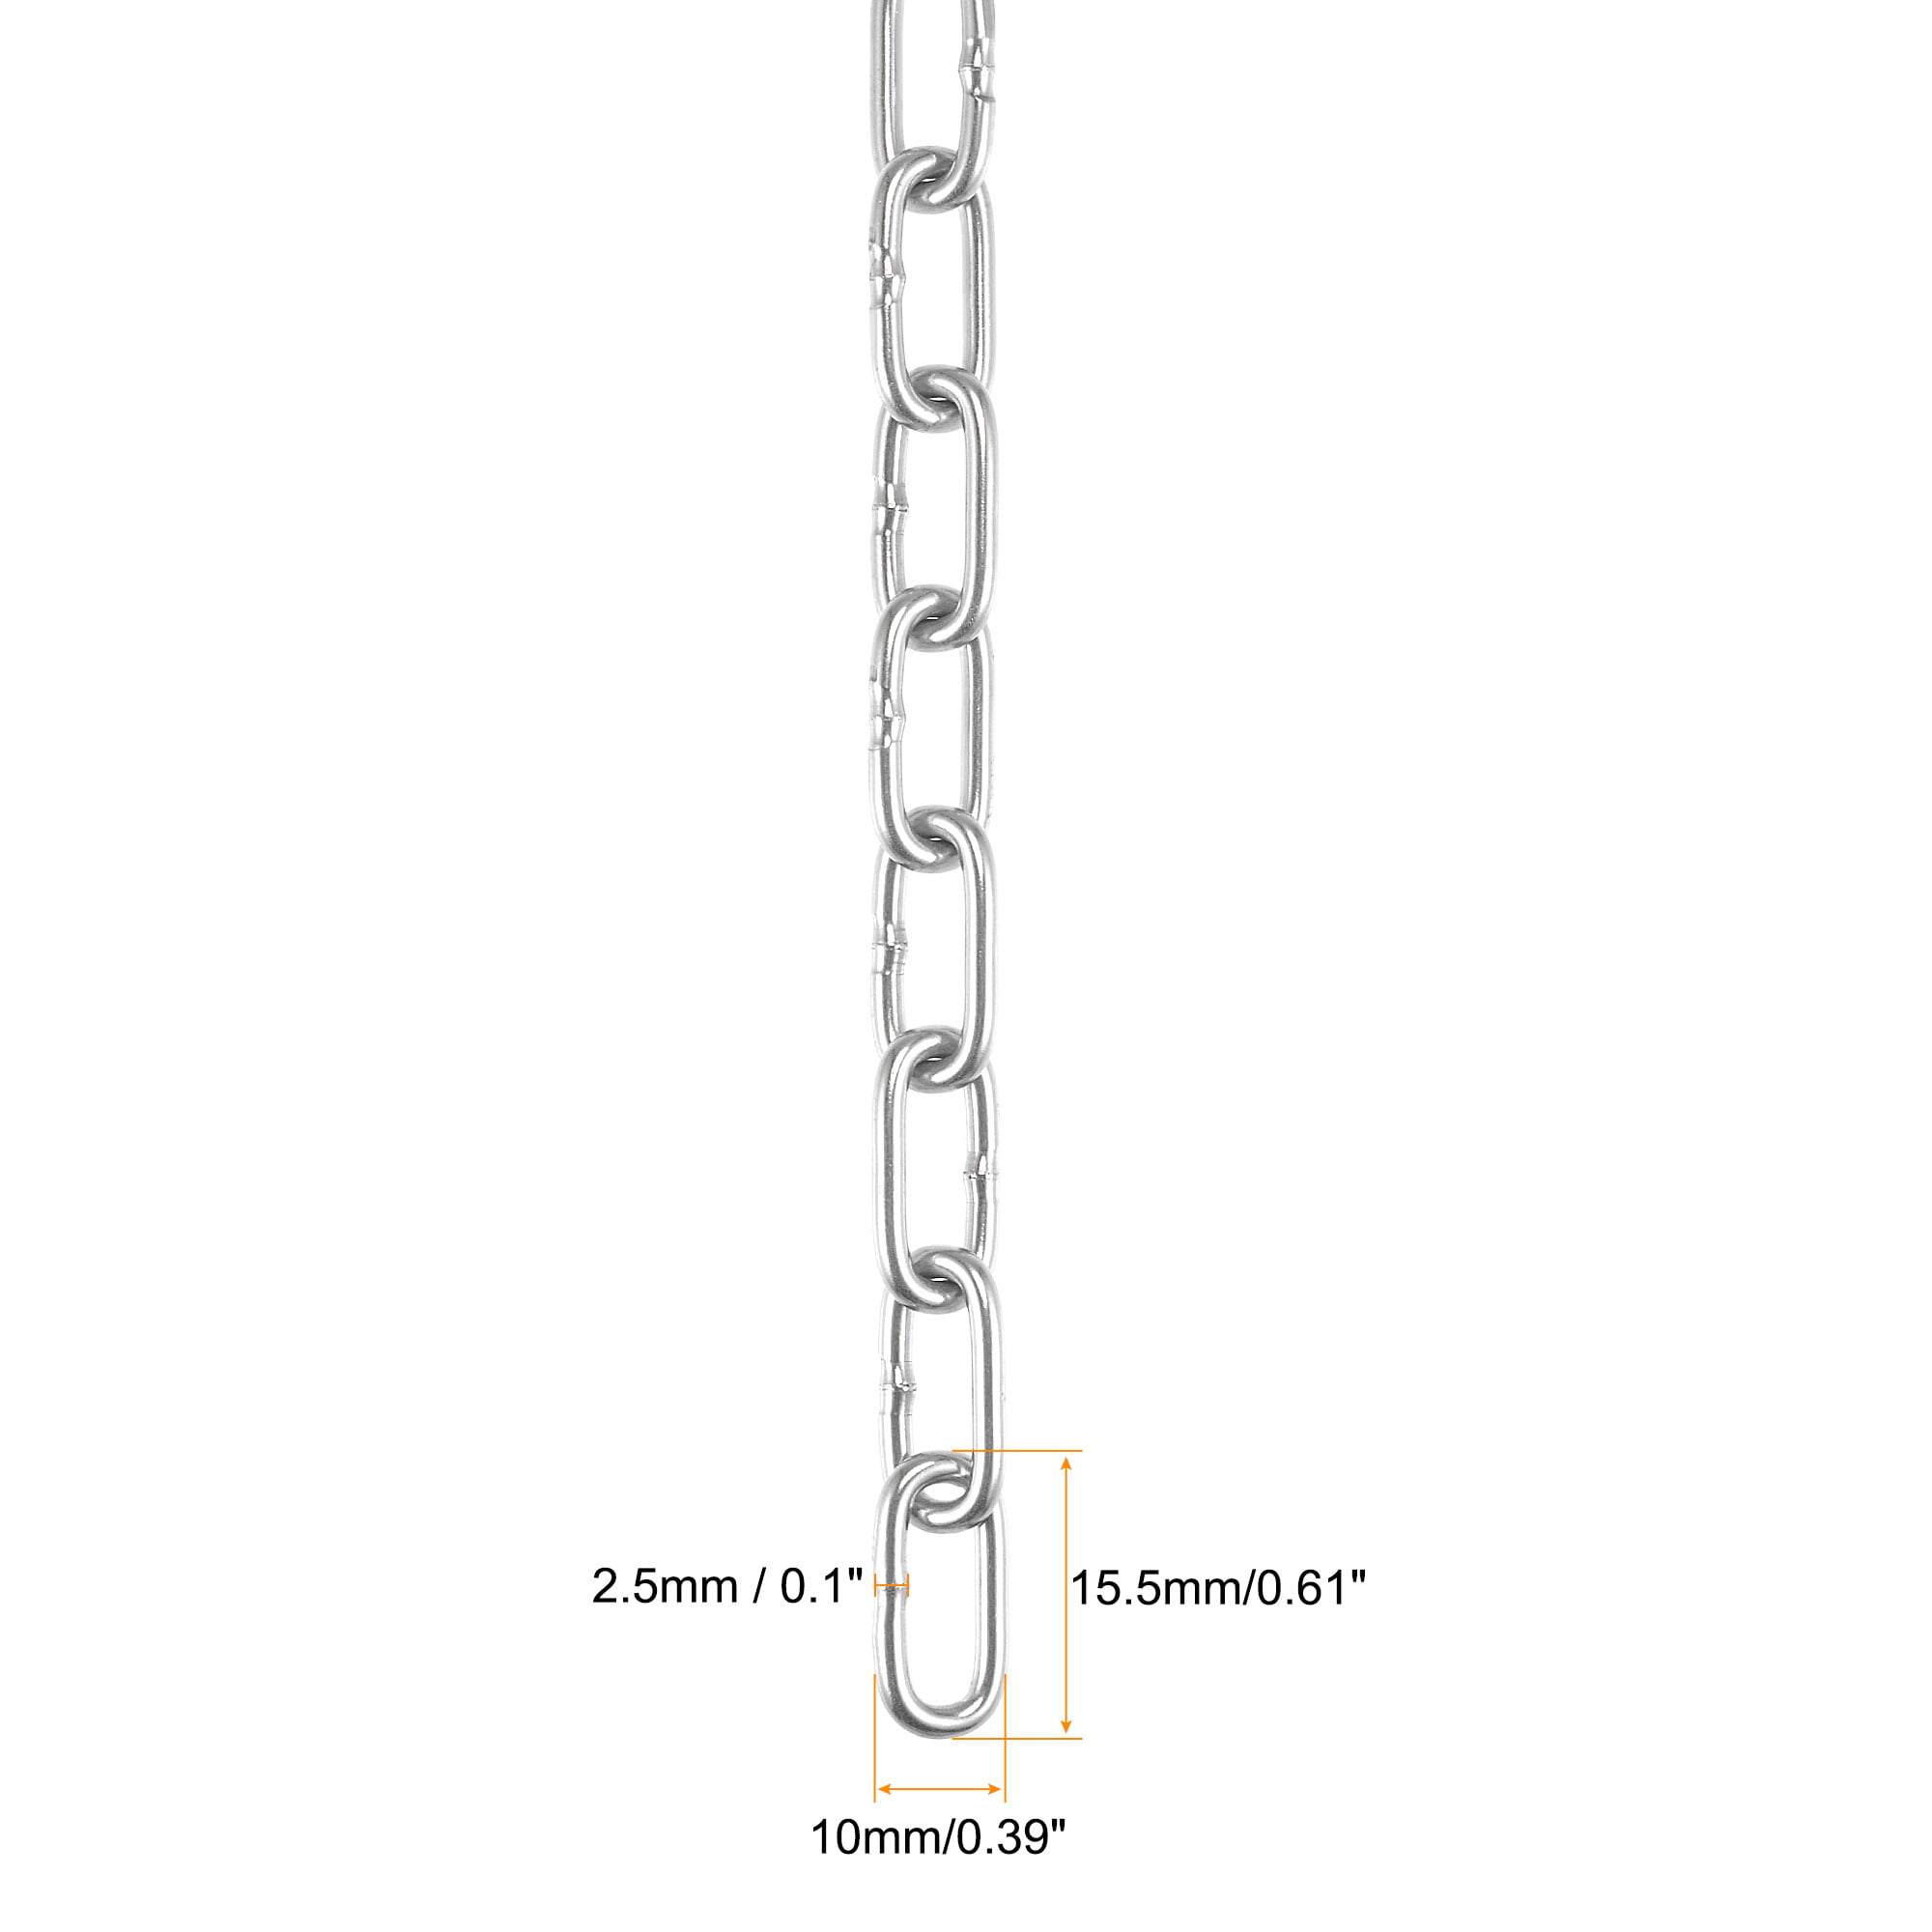 uxcell Proof Coil Chain 4 Meter 2.5mm Thick Zinc Plated 304 Stainless Steel for Clothes Hanging Guardrail